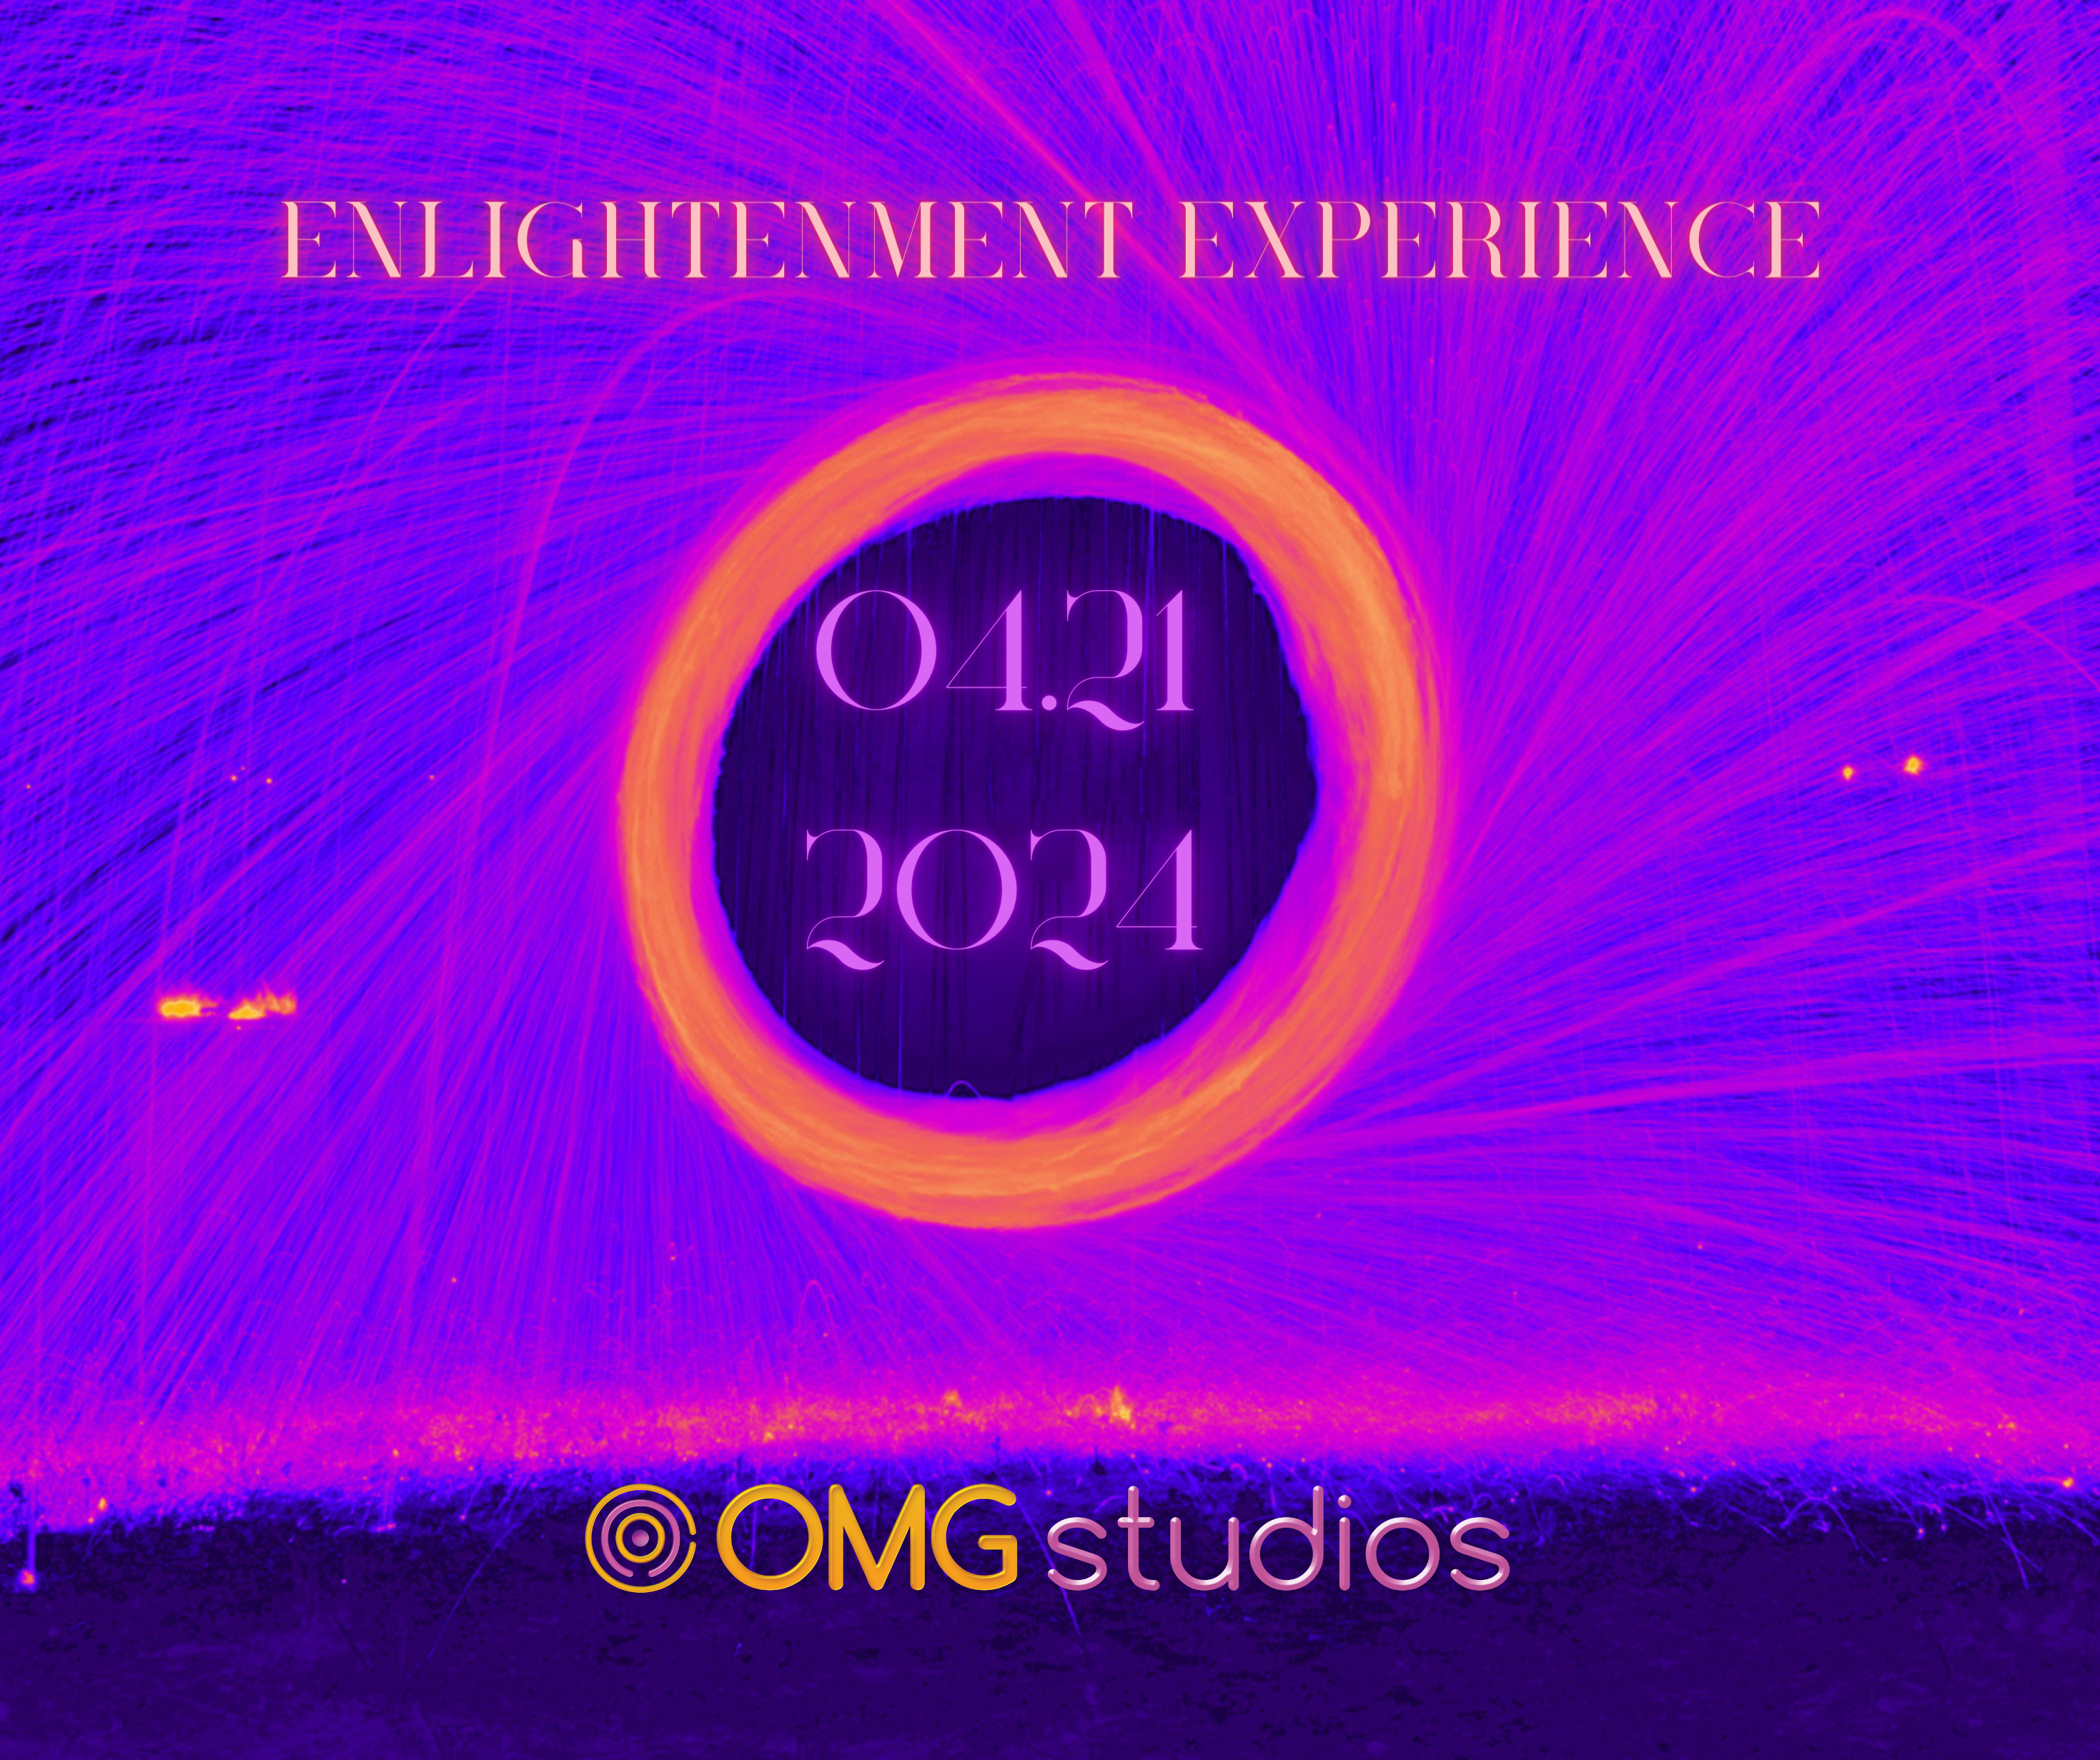 Enlightenment xperience